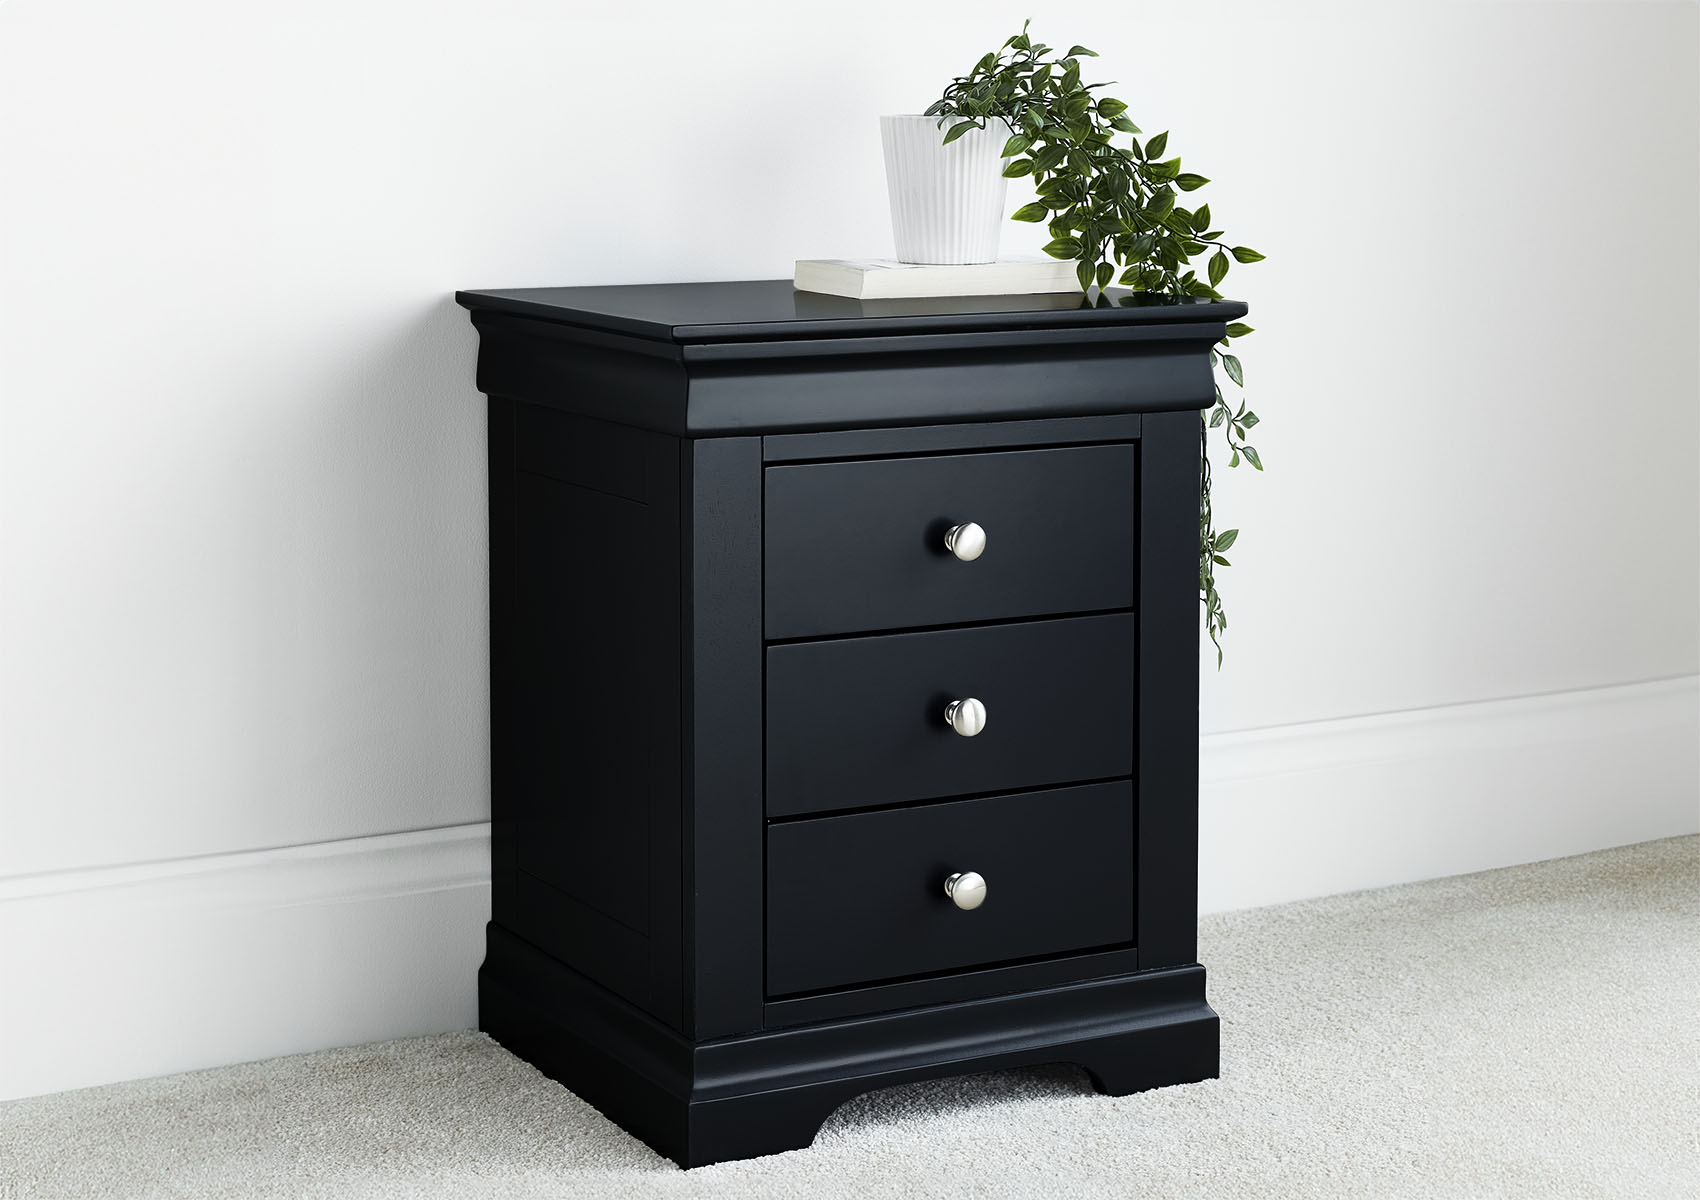 View Chateaux Black 3 Drawer Bedside Time4Sleep information